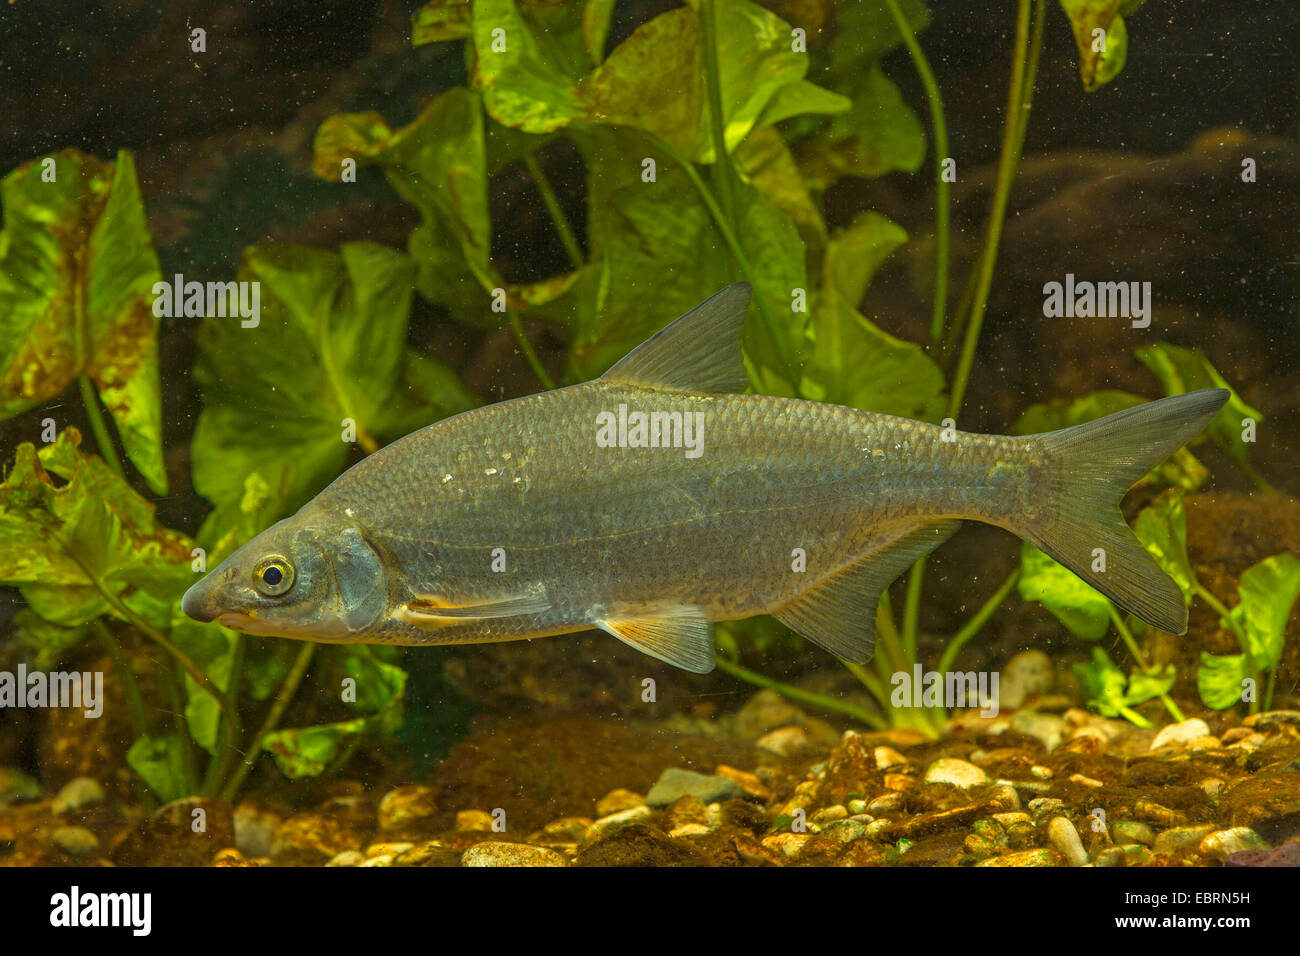 East European bream, zaehrte, Baltic vimba, Vimba bream, Vimba, Zanthe, Zarte (Vimba vimba, Abramis vimba), in front of pond-lilies, Germany Stock Photo